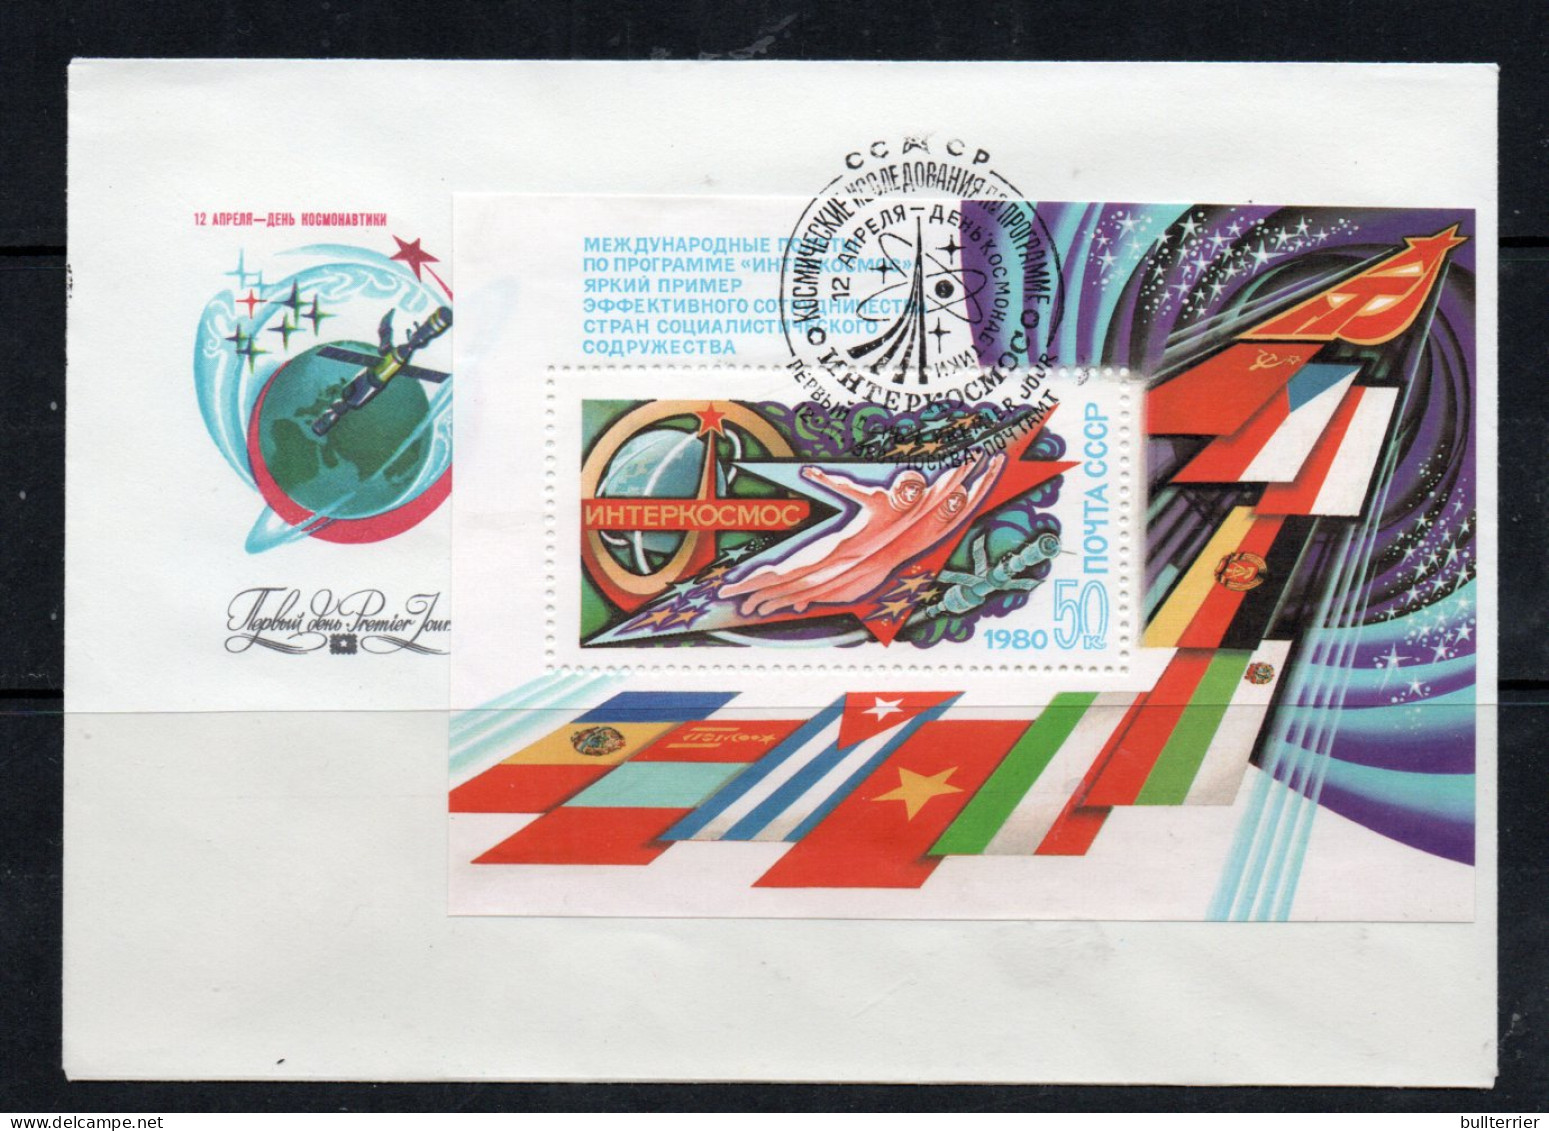 SPACE - USSR - 1980 - INTERCOSMOS SOUVENIR SHEET ON  ILLUSTRATED FDC   - Russie & URSS